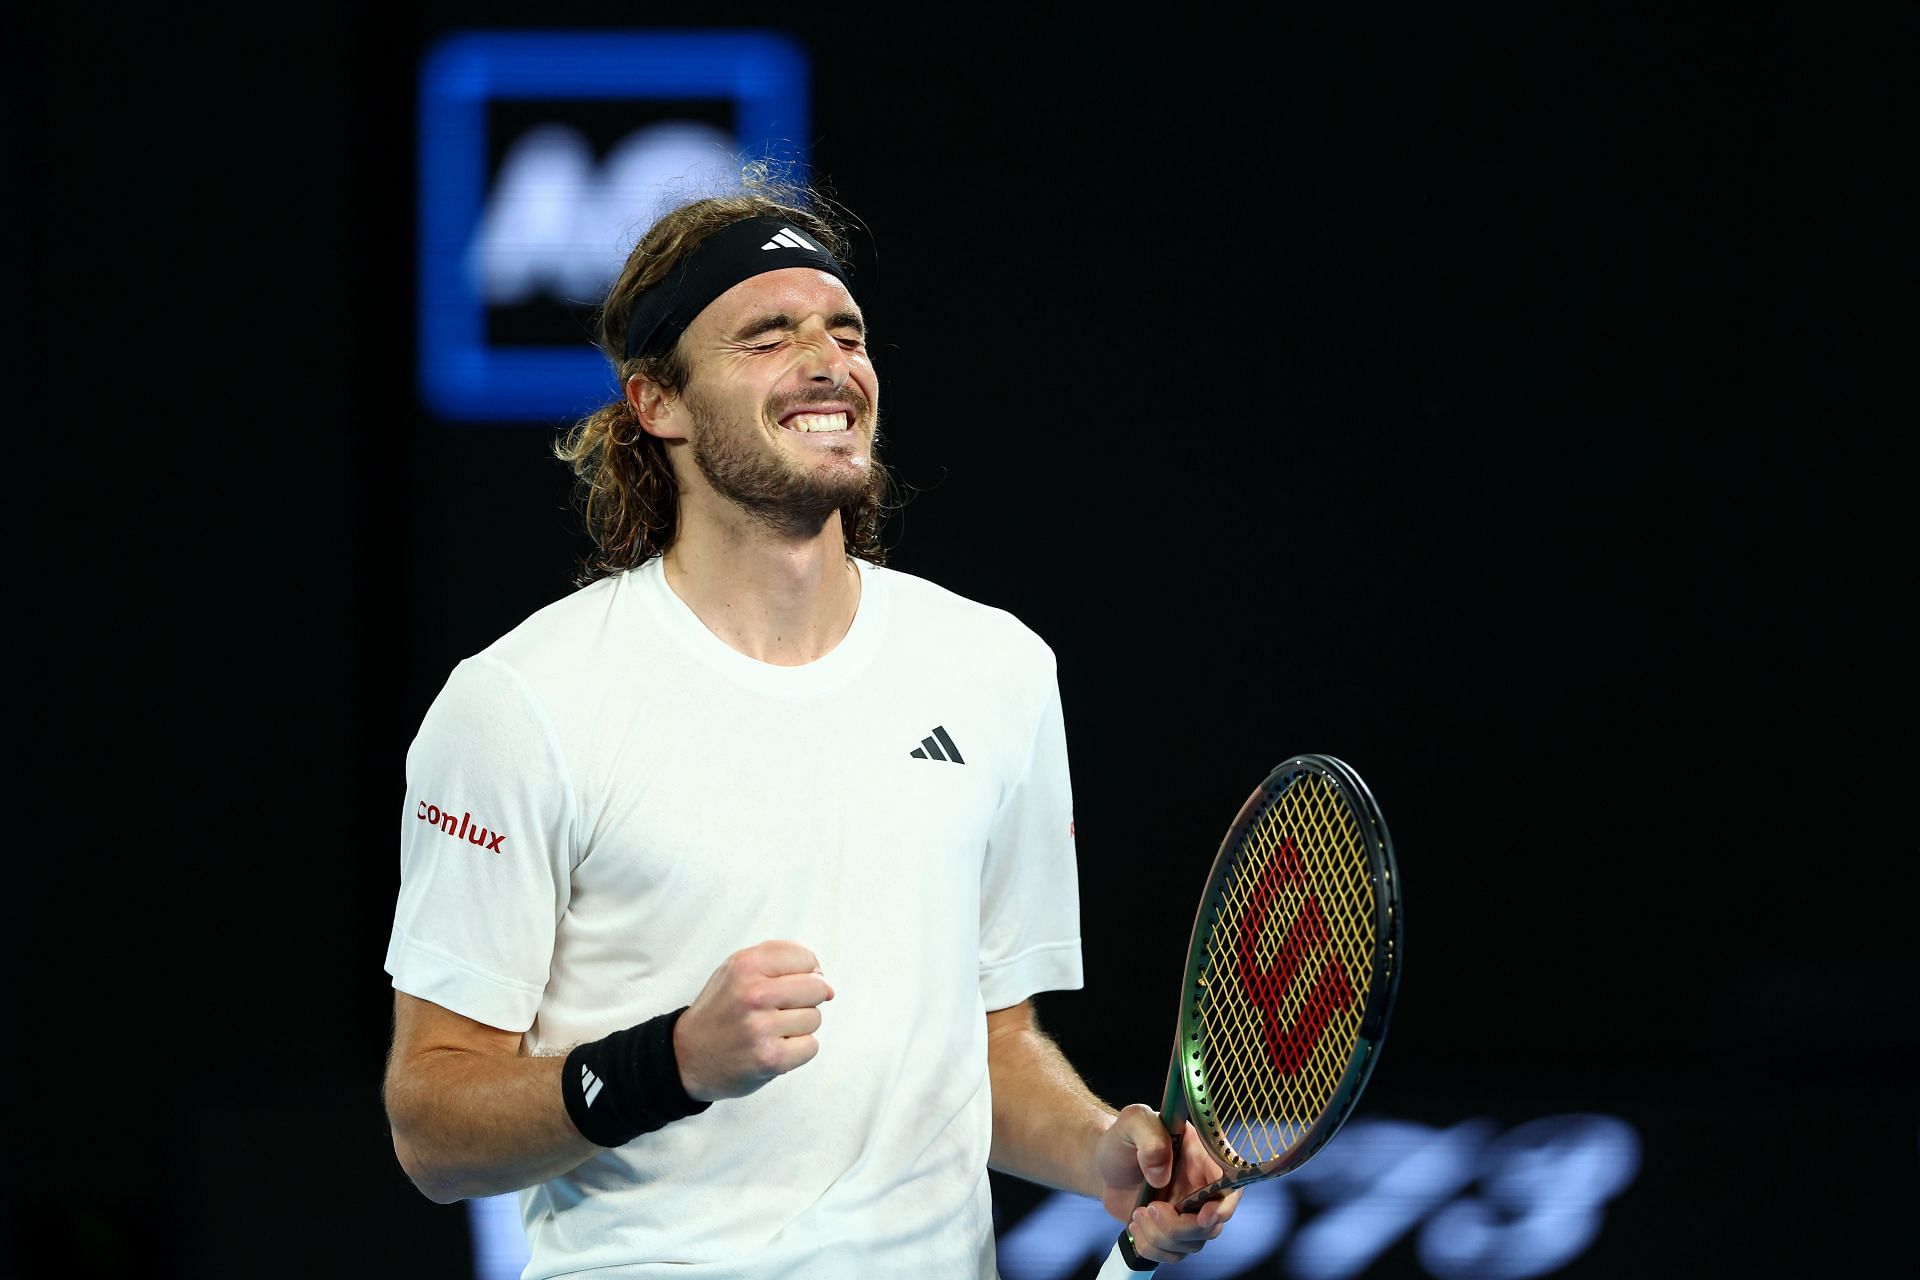 Tsitsipas will be a favorite to win on paper.